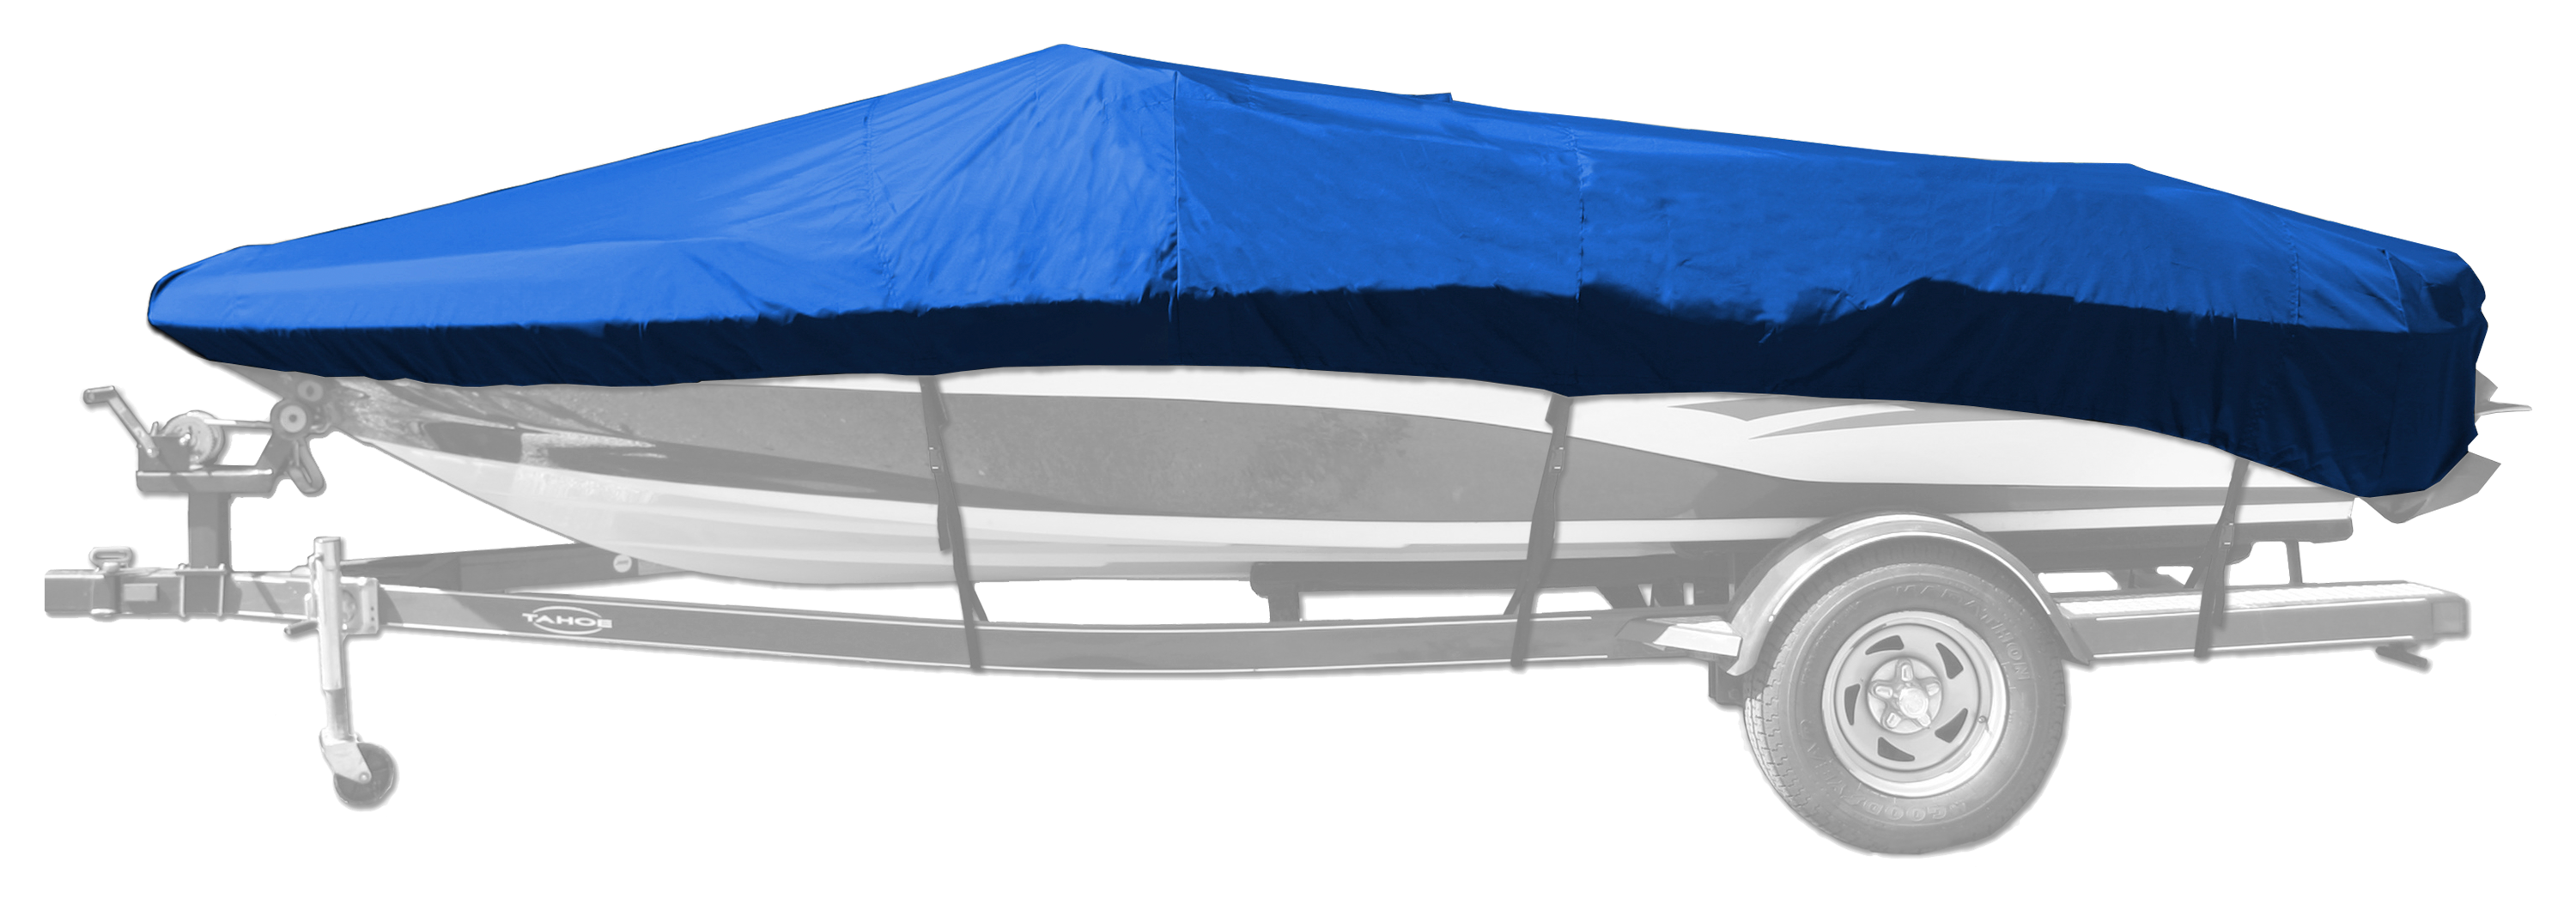 Bass Pro Shops Select Fit Hurricane Boat Cover by Westland for Euro V-Hull Runabout I/O Model - Blue - 22'6'' to 23'5